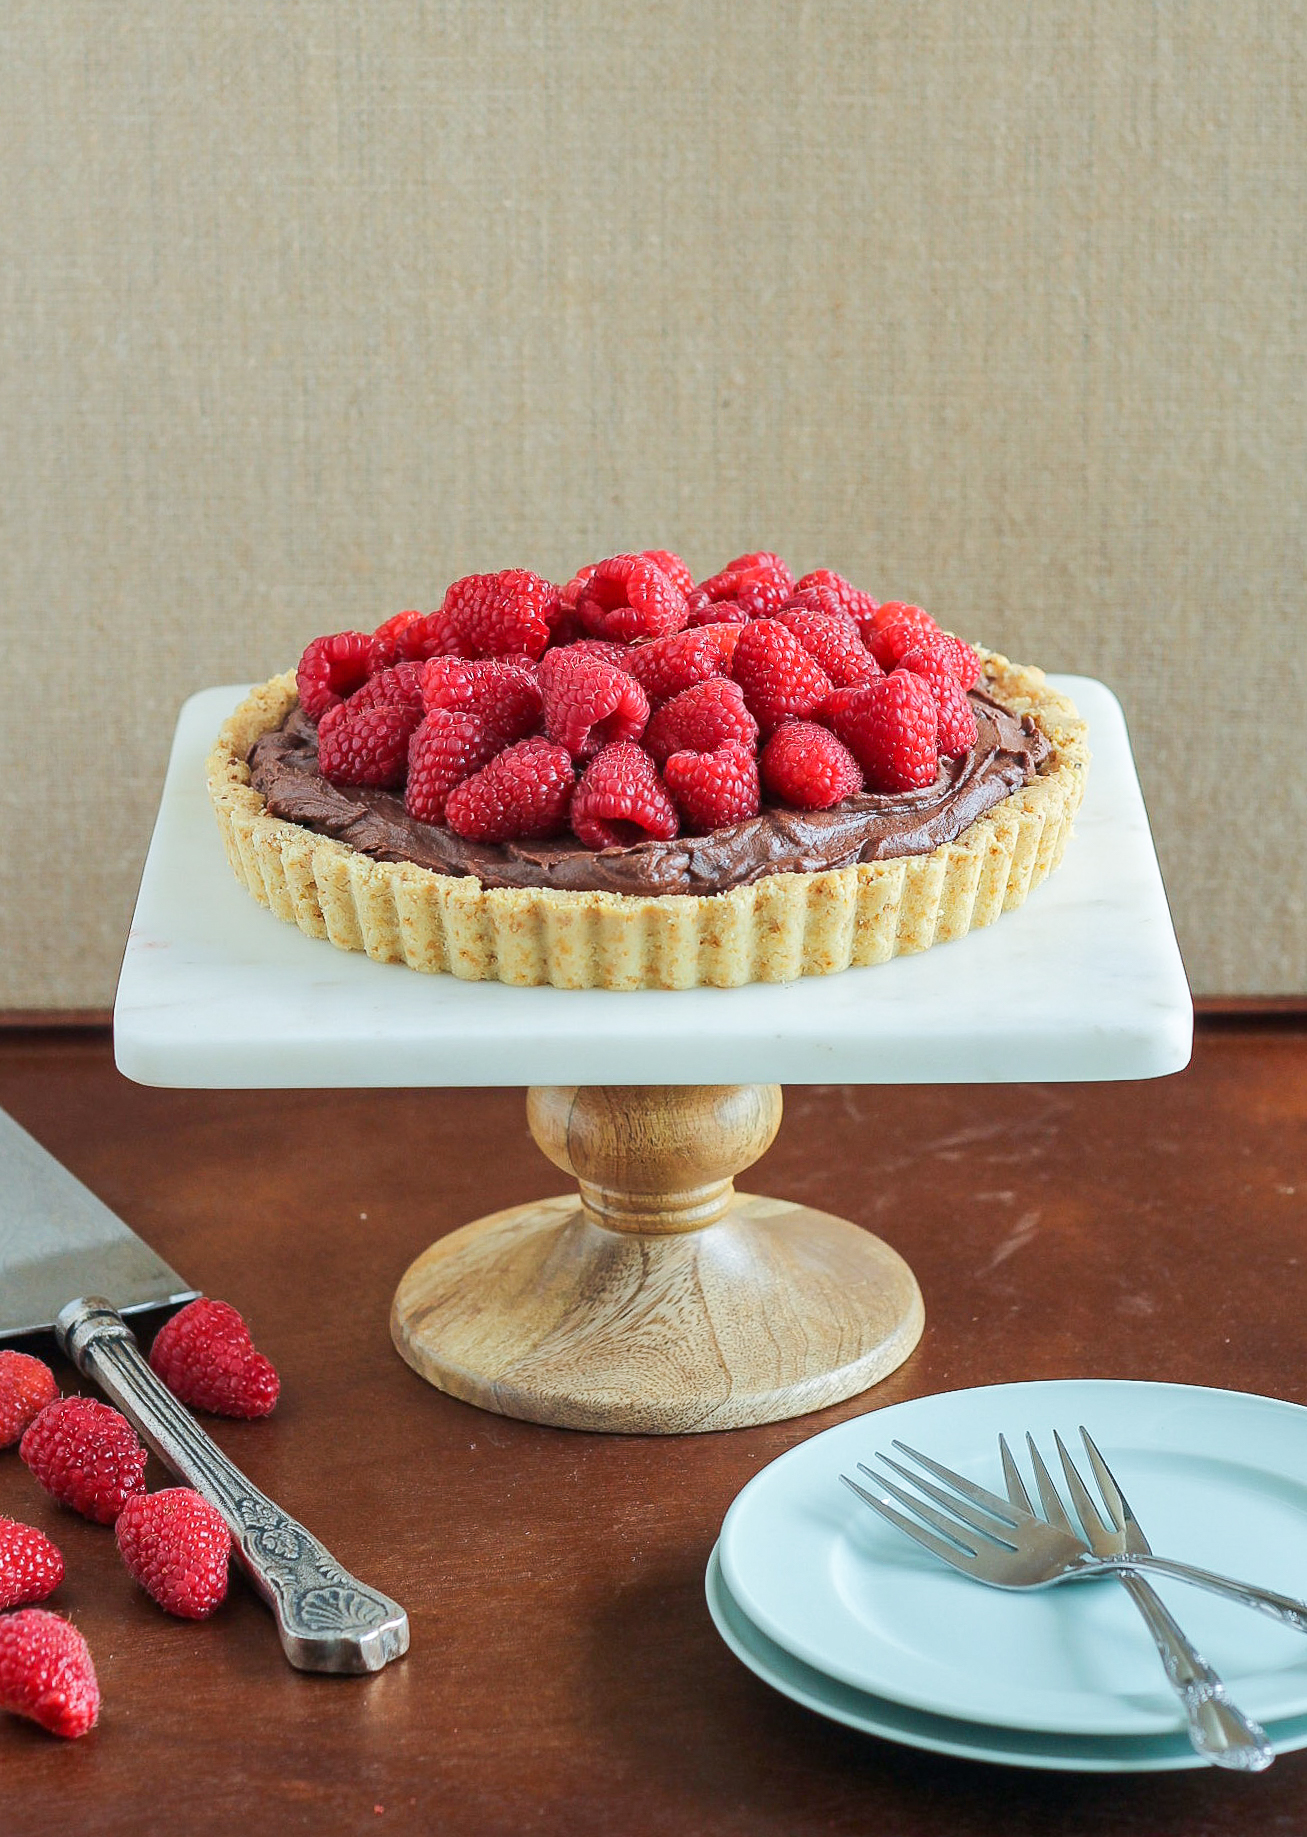 This Whipped Chocolate Ganache Raspberry Tart has an almond flour crust filled with creamy chocolate ganache topped with fresh raspberries! It's naturally gluten free.